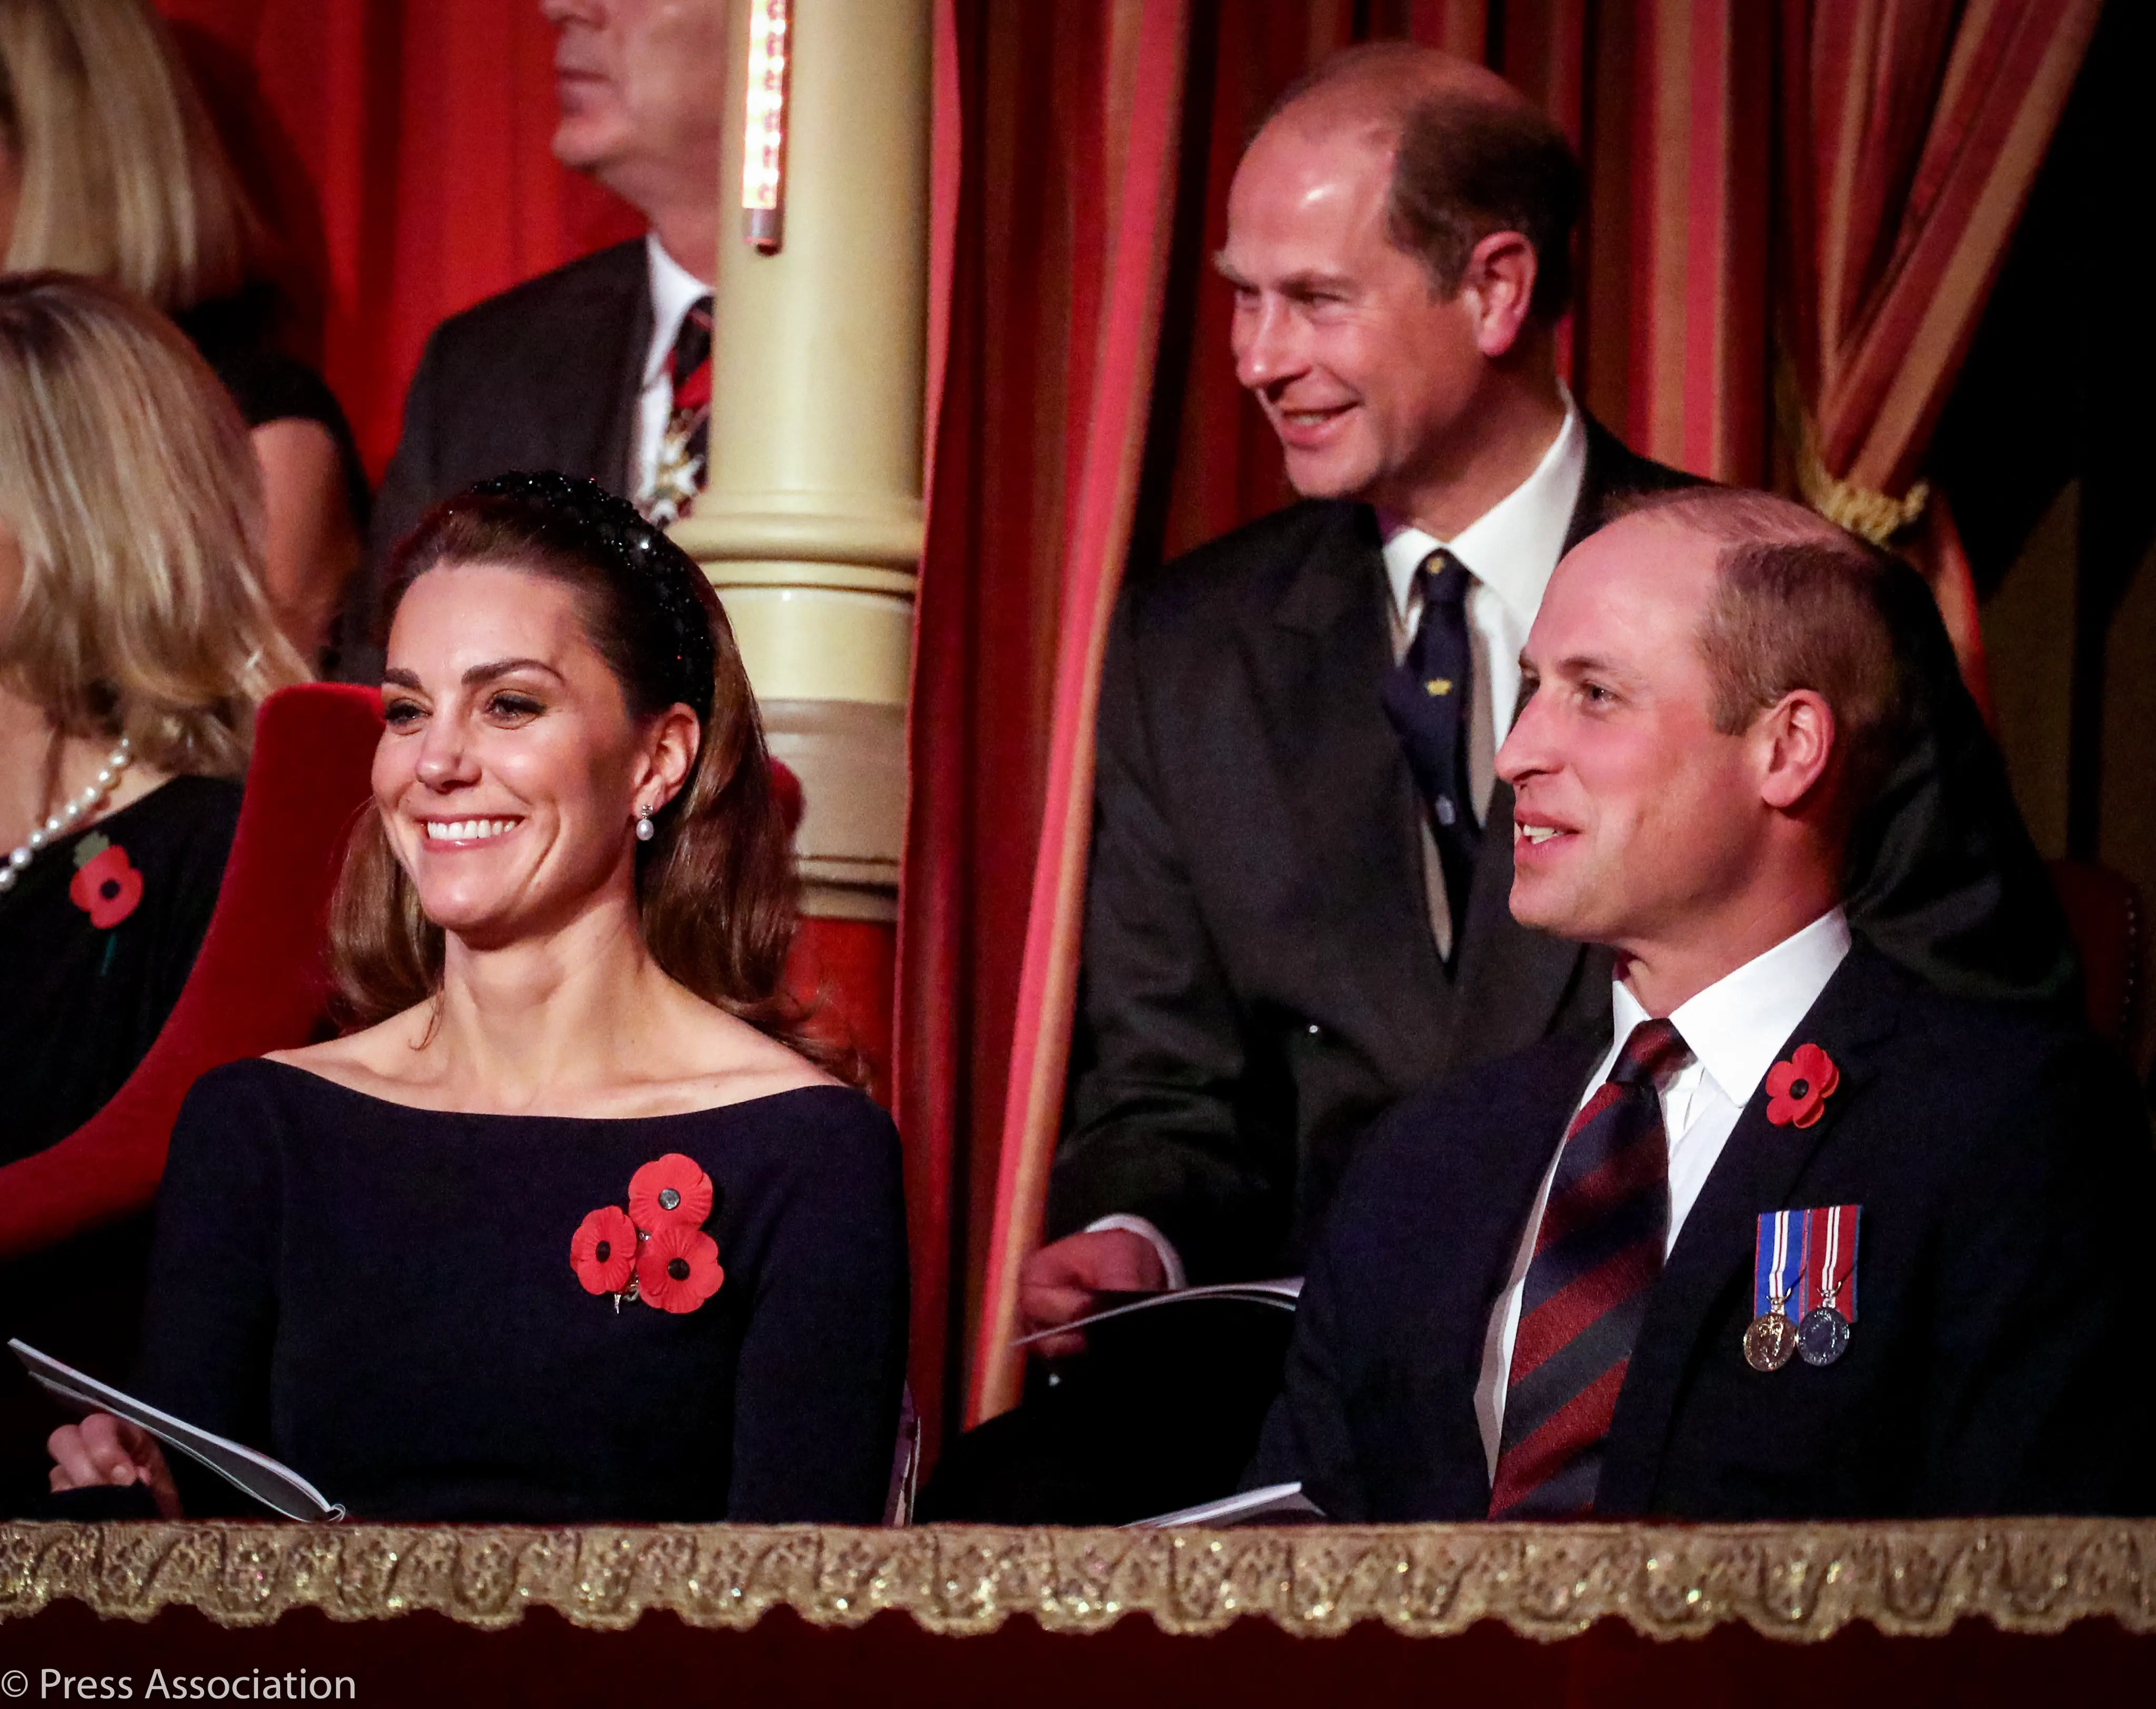 The Duchess of Cambridge arrived for the Festival of Remembrance